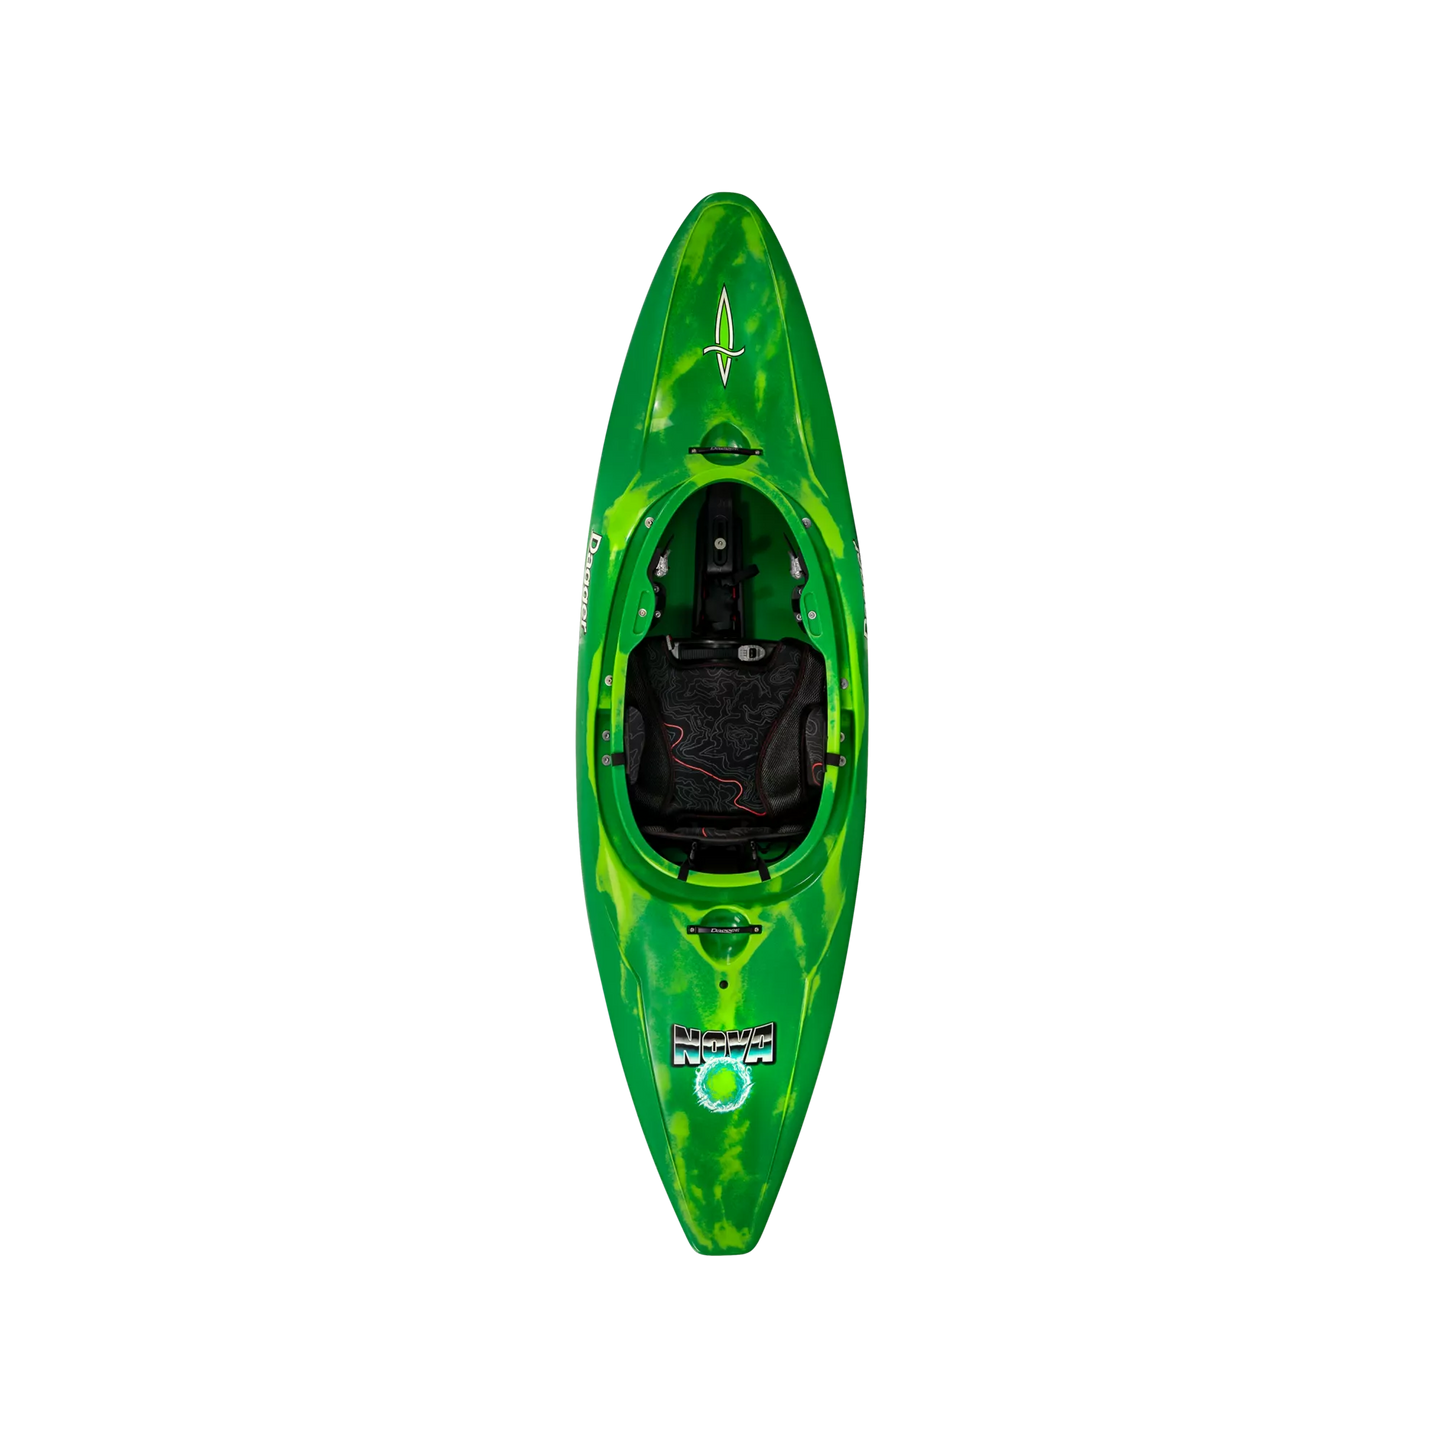 Green Smoke full slice river play whitewater kayak.The Dagger Nova and Supernova are uniquely designed for 2 different paddler size ranges so you can saddle up, slice, surf, and spin your way to hours of amusement. 